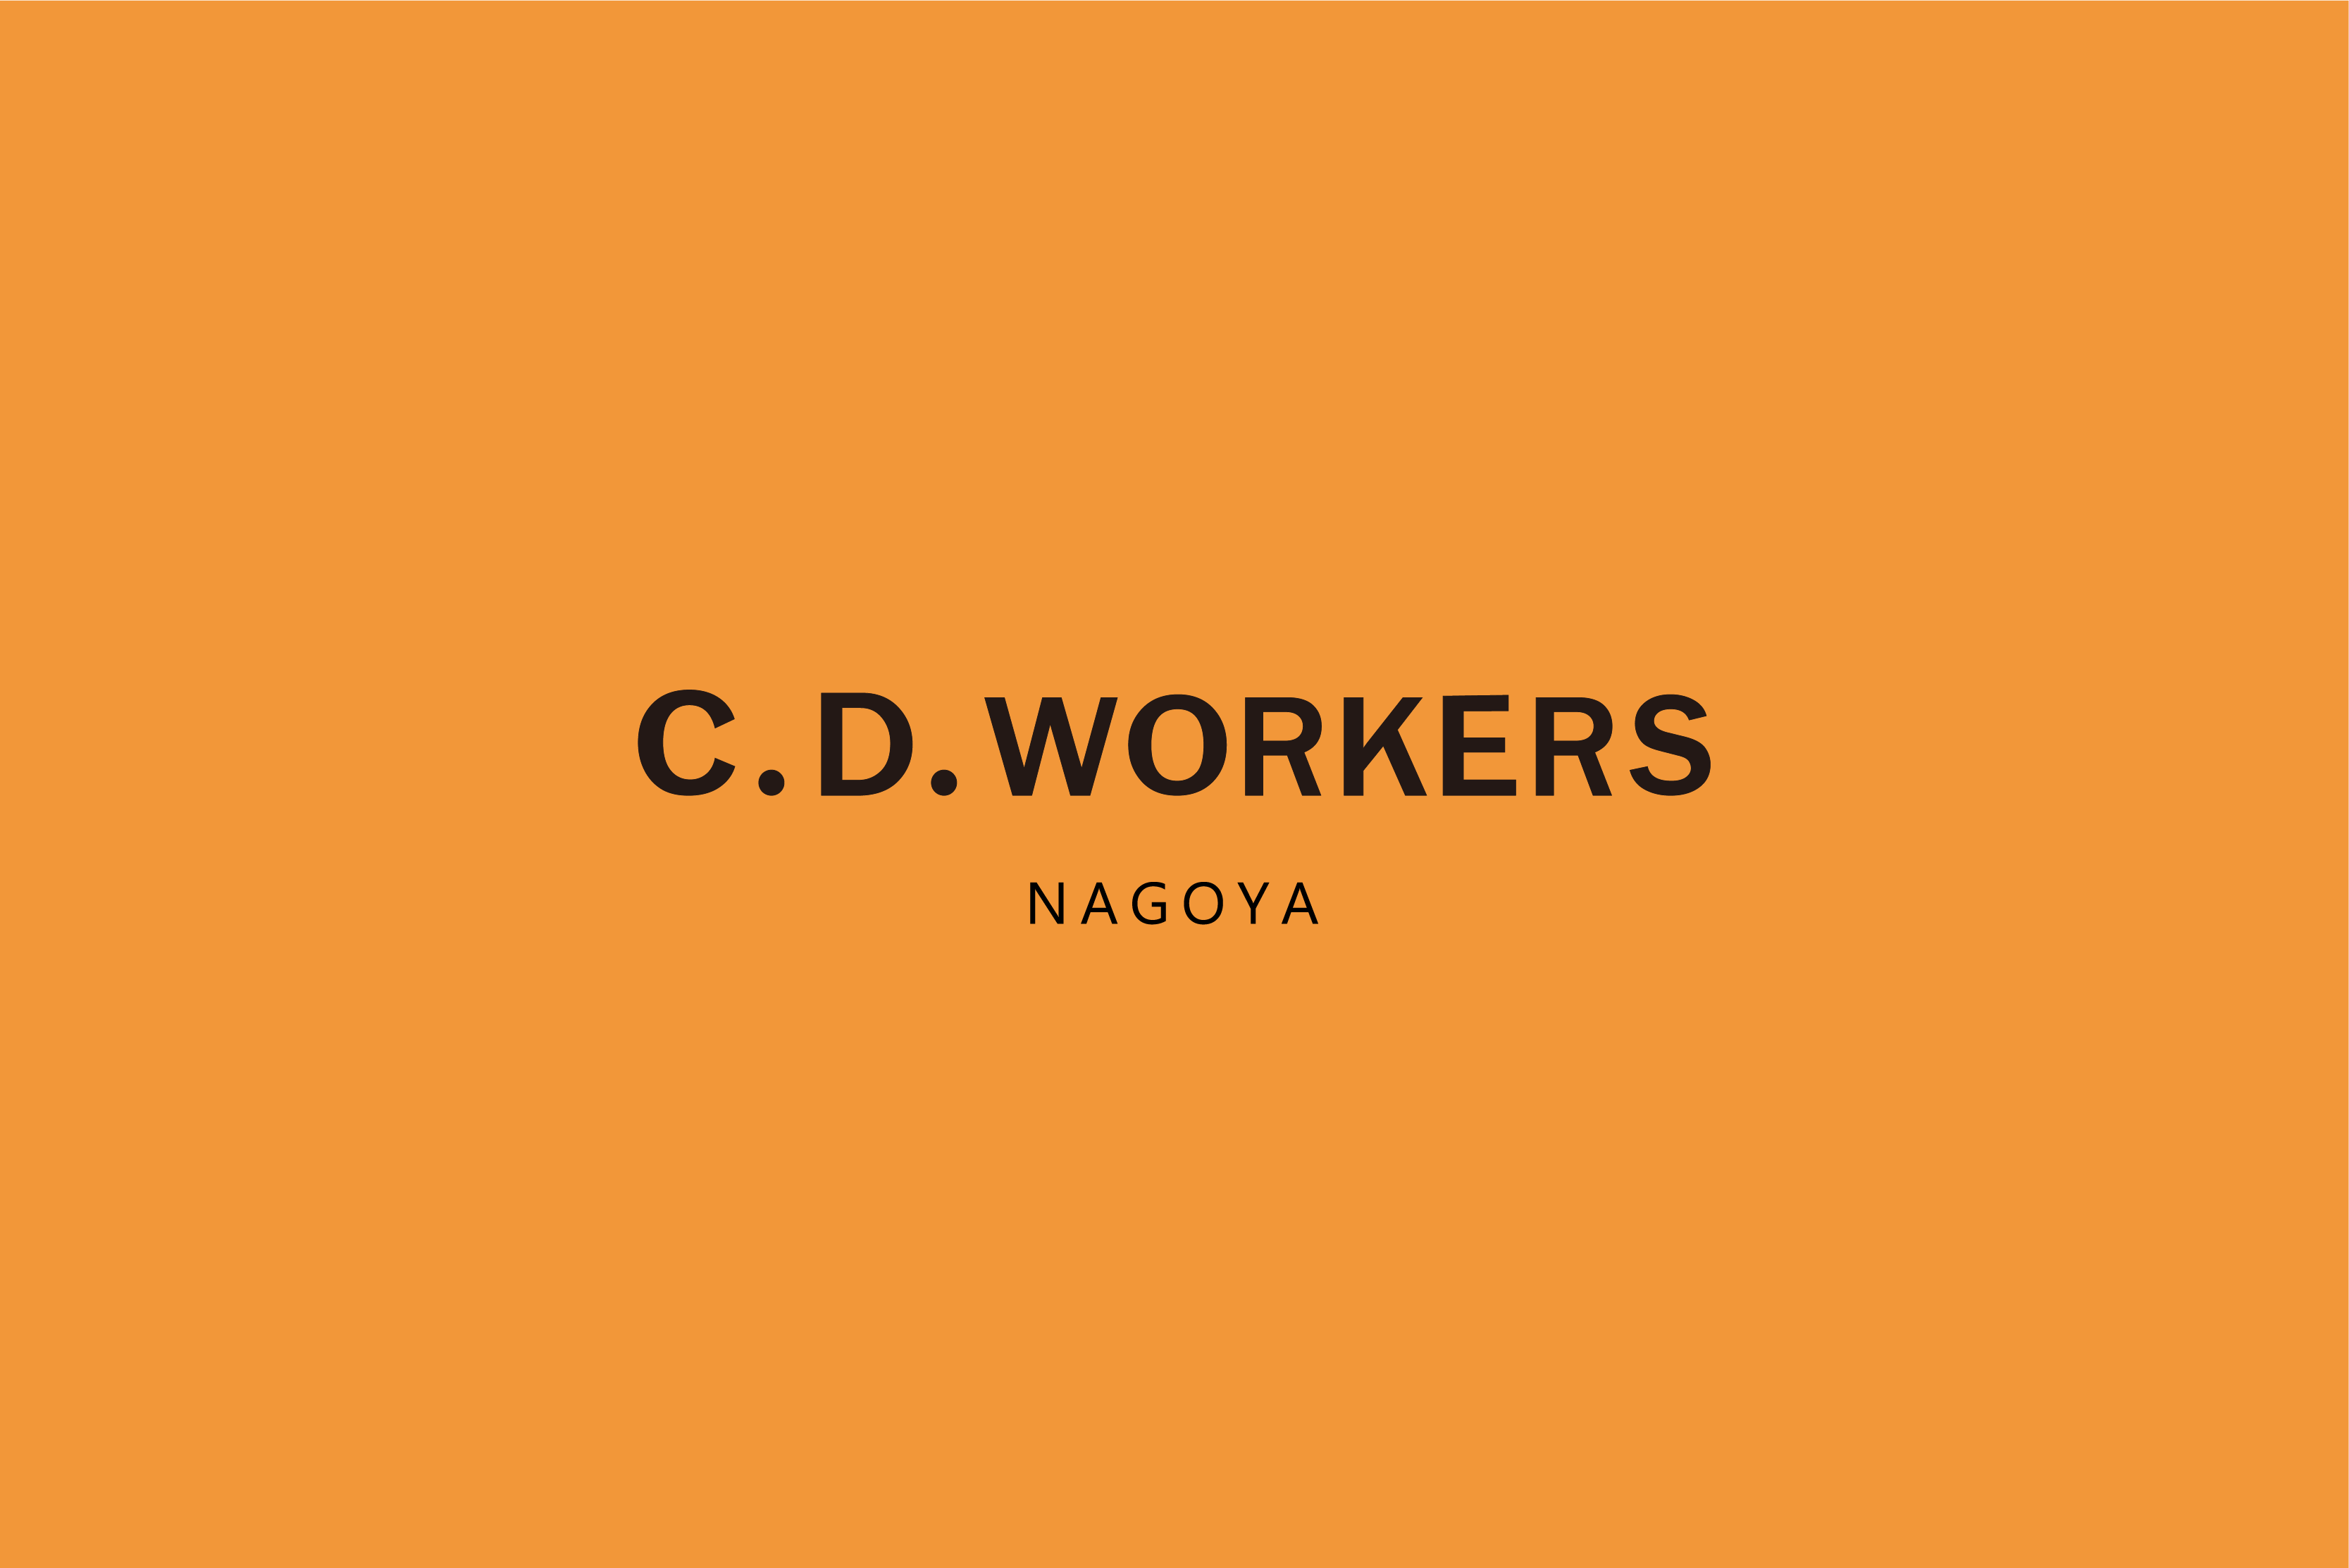 C.D.WORKERS